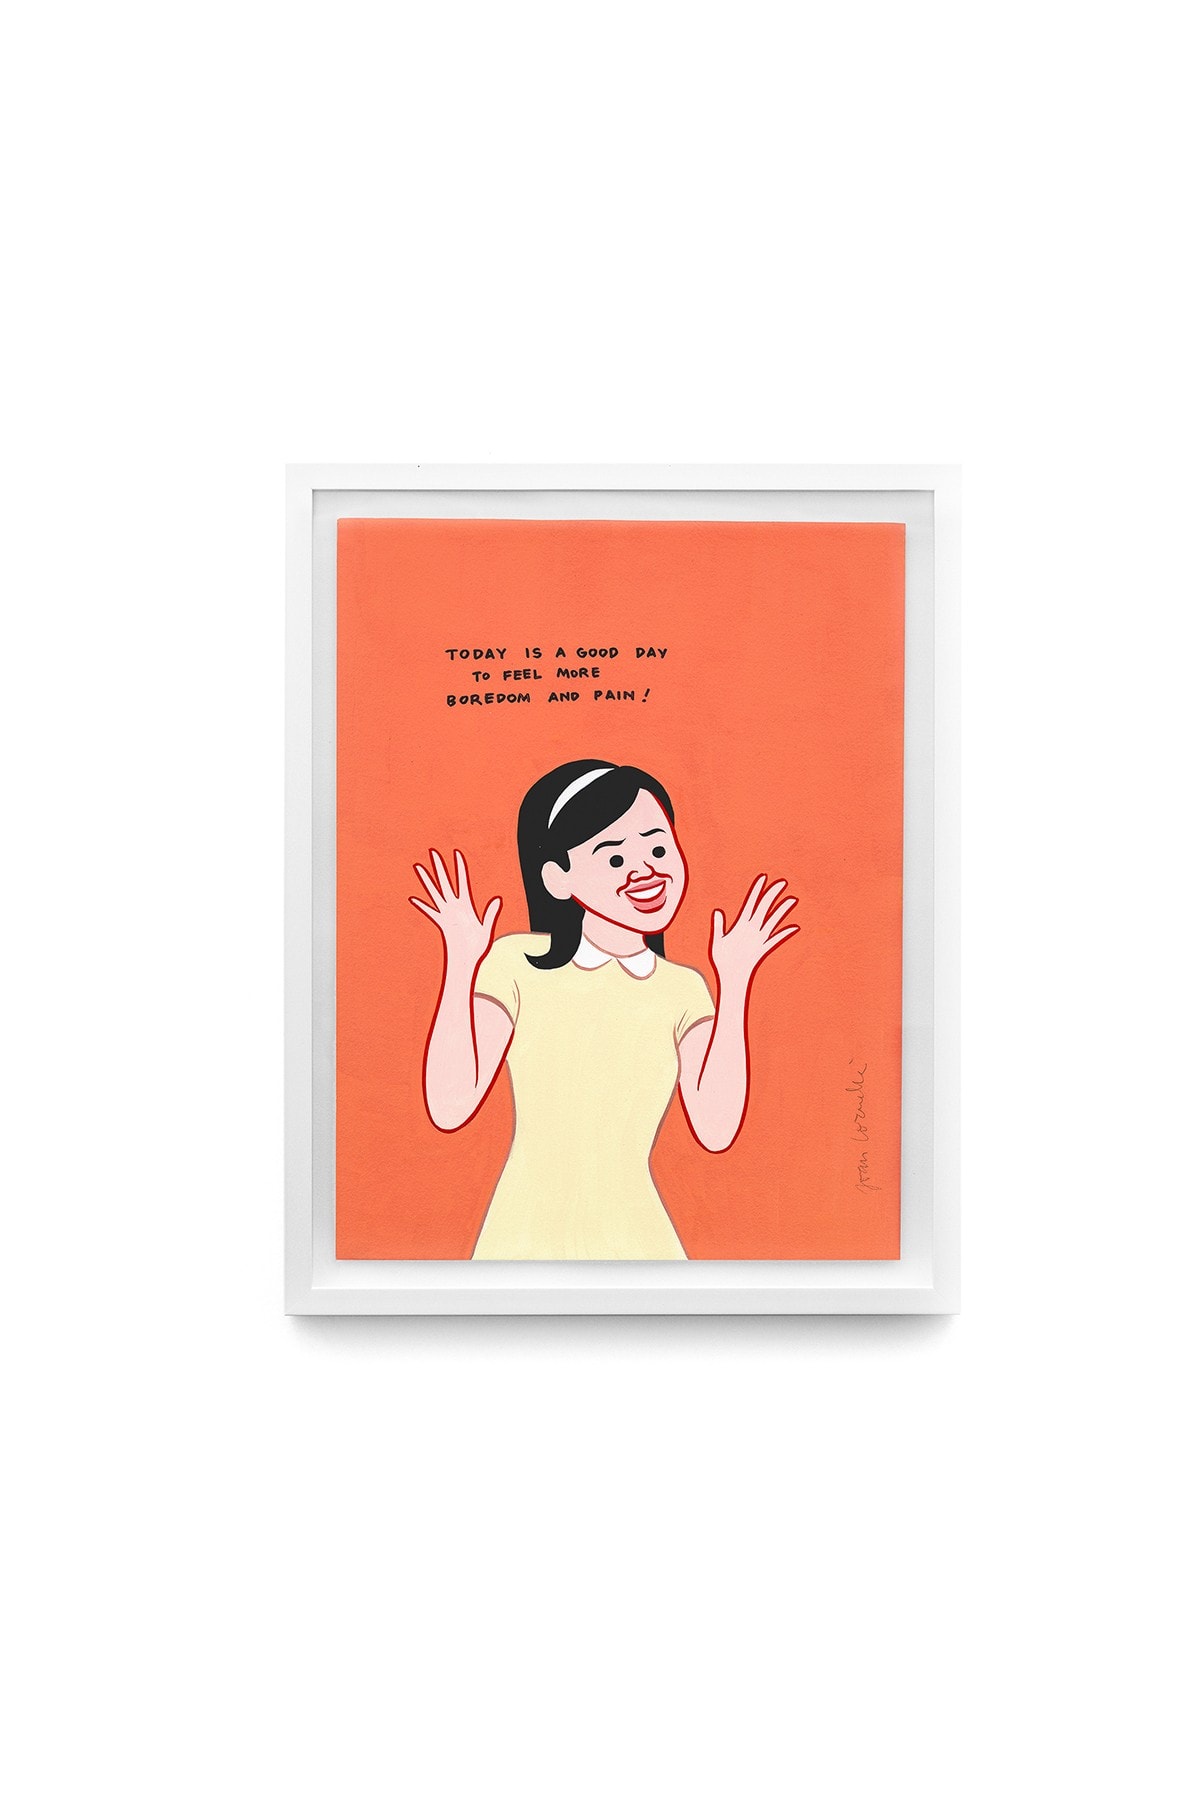 Joan Cornellà hk sotheby's AllRightsReserved selling exhibition my life pointless